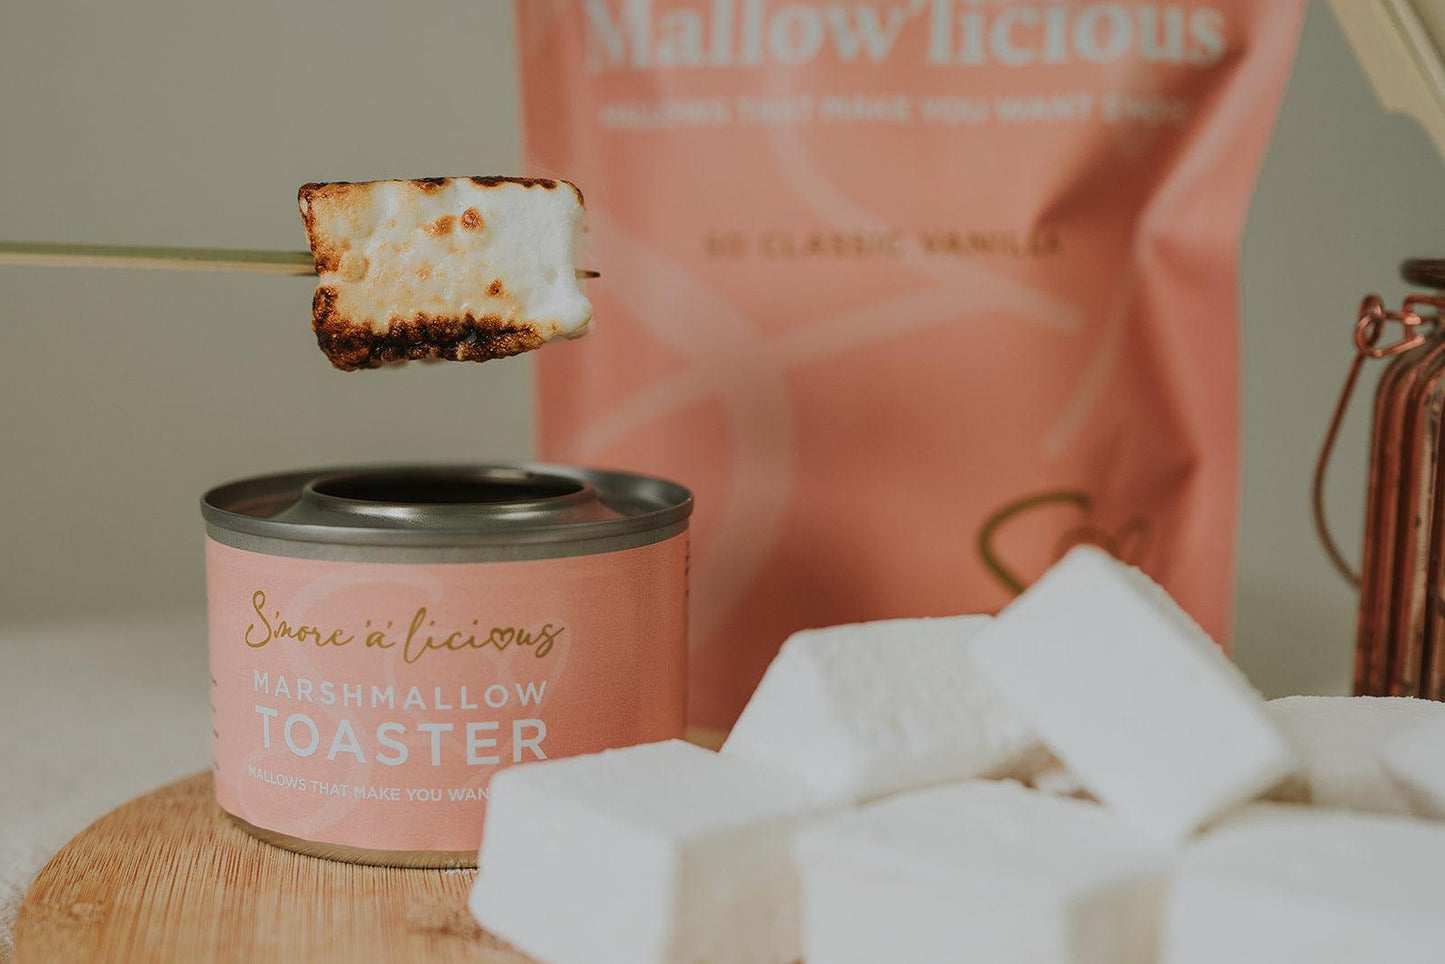 Gluten Free S’mores Kit - S’more’a’licious -<code> smorealicious.com </code>Handmade gifts and treats made in Northern Ireland